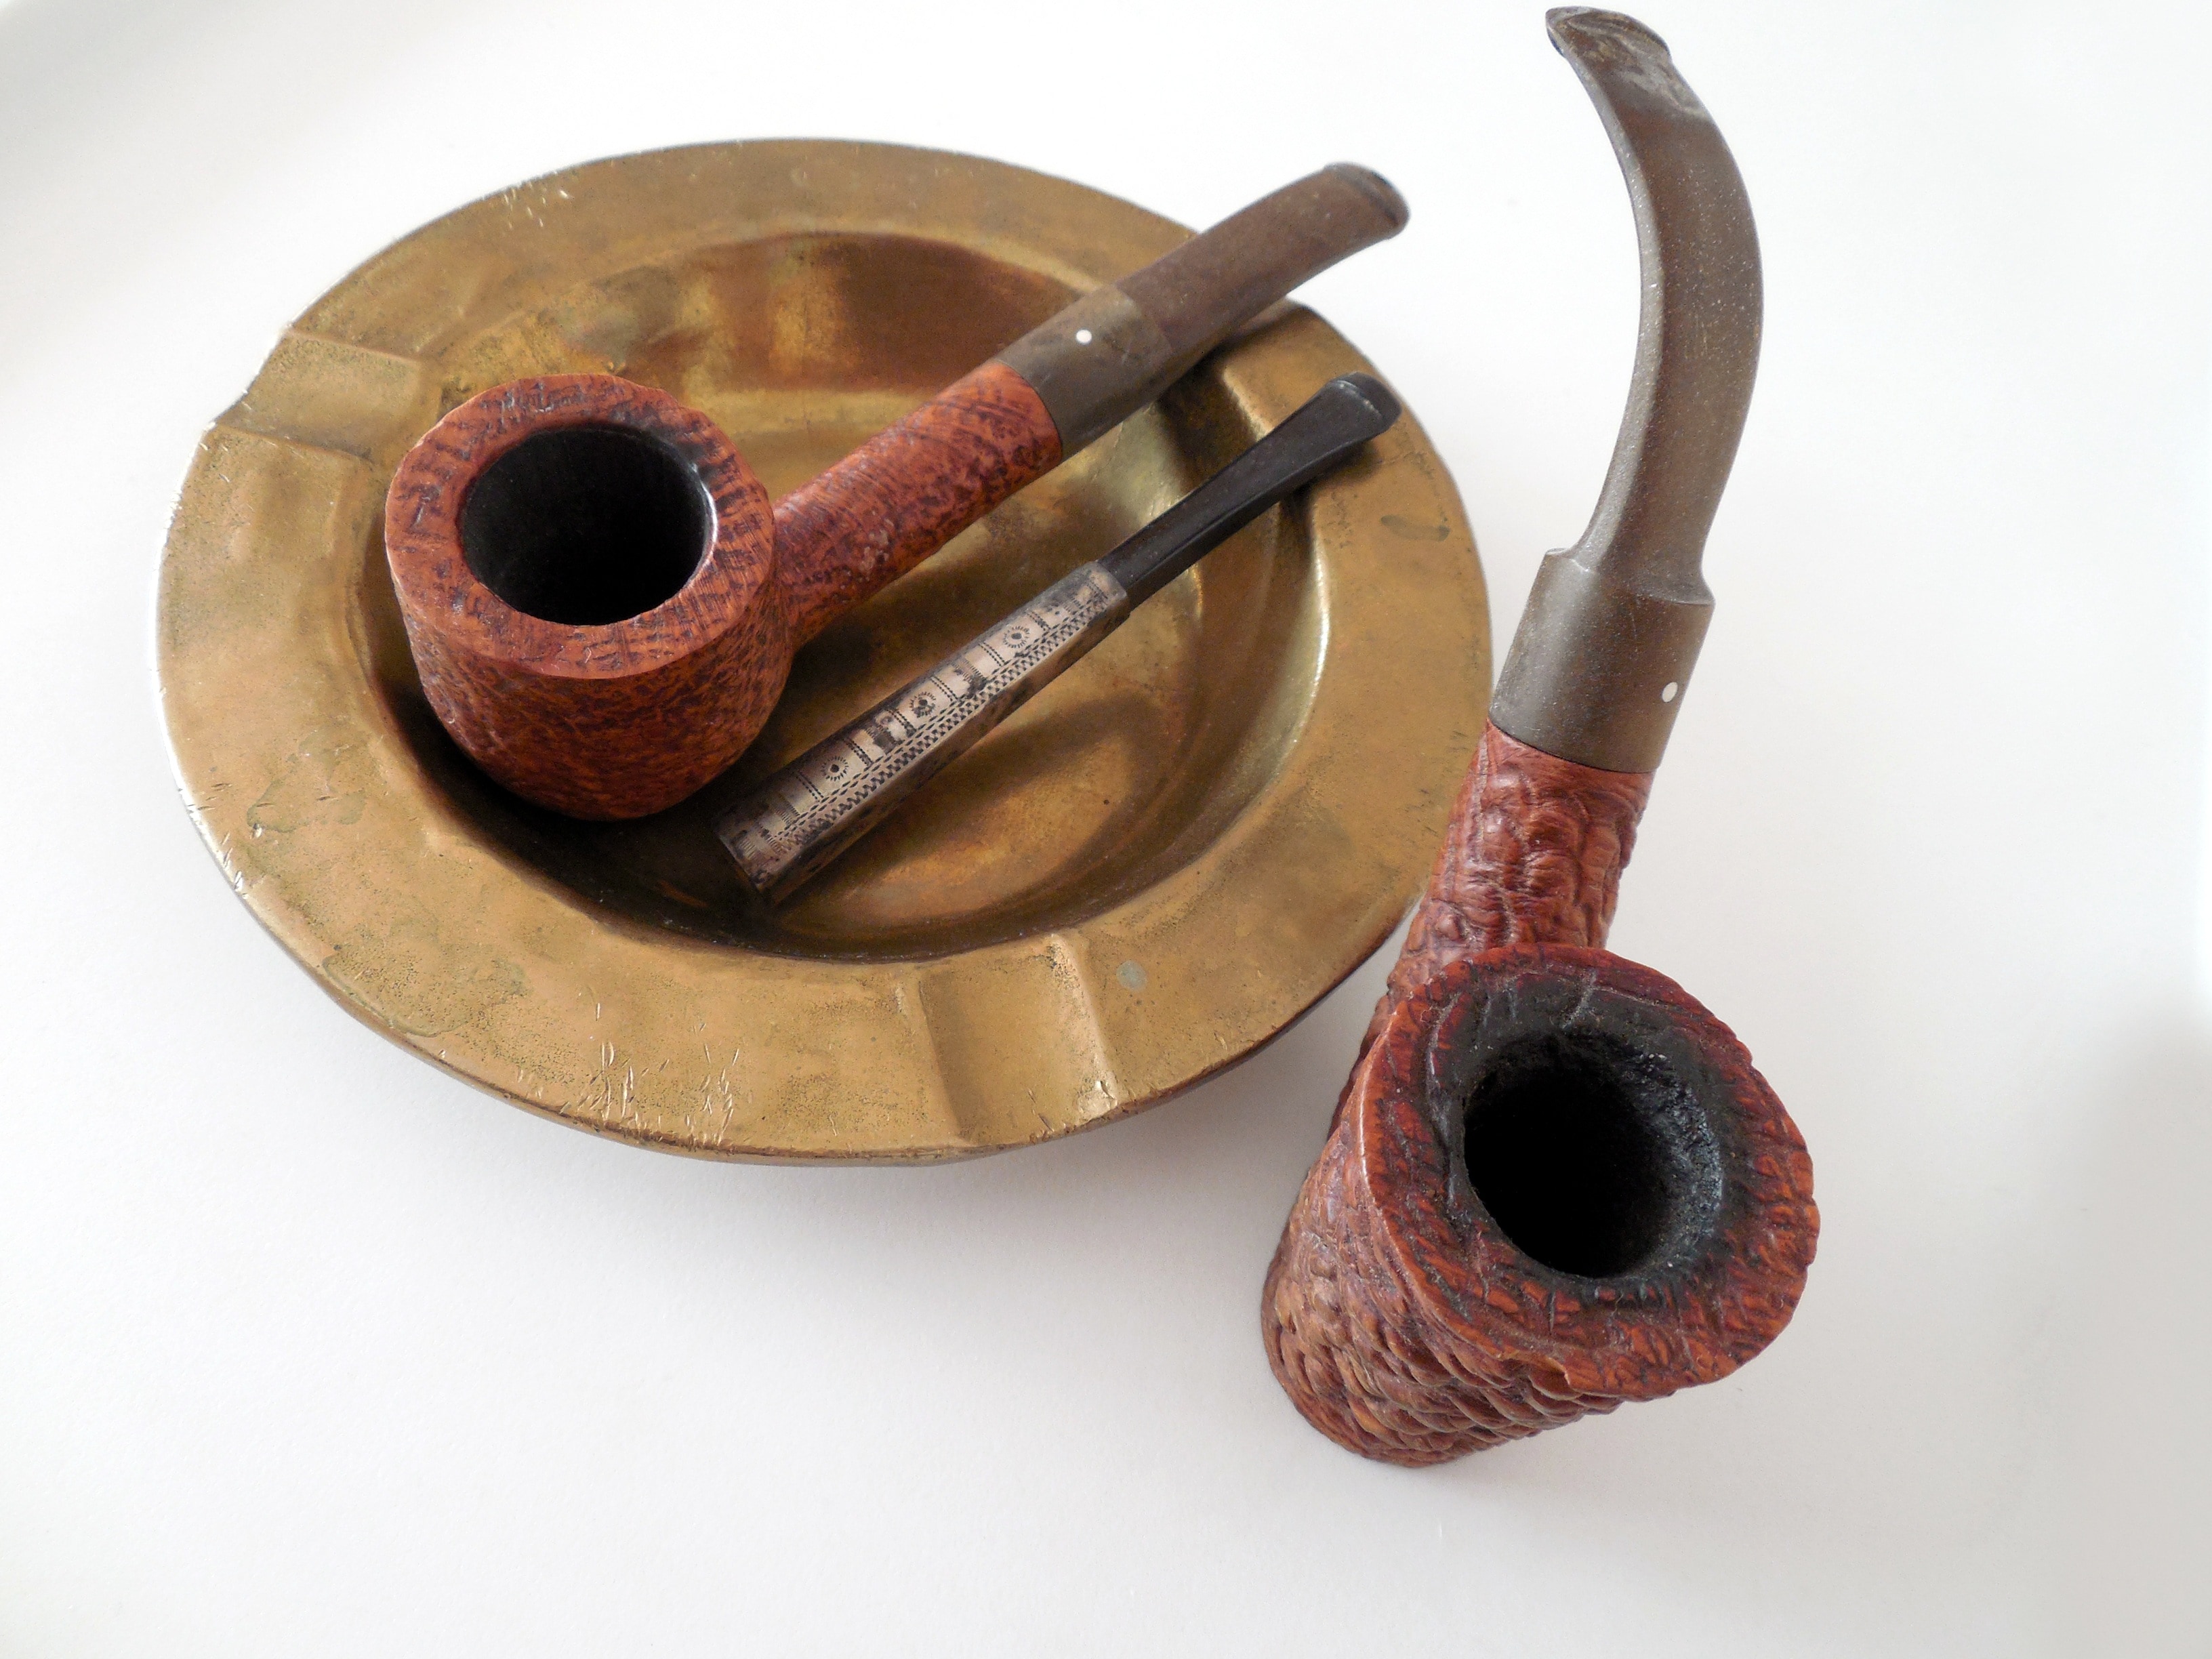 2 brown and red smoking pipes, brown ashtray